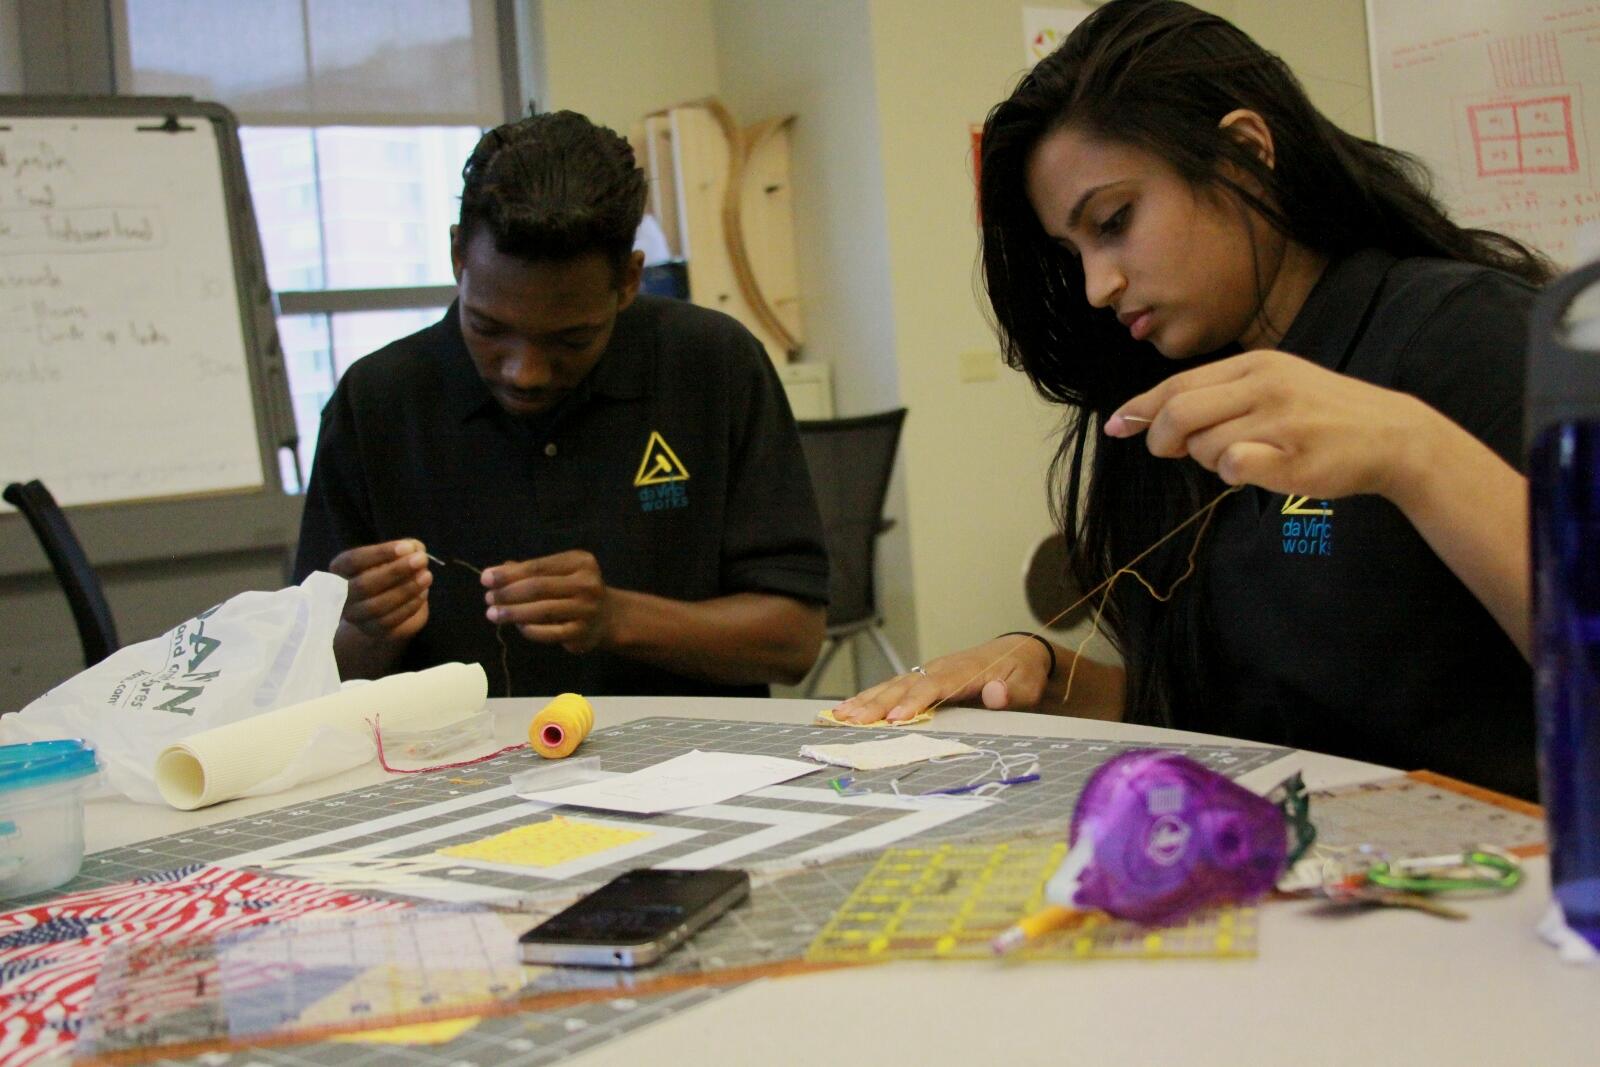 Desmund Delaney and Poojah Shah work on assembling a quilt, using a kit they're developing that will allow customers to make a quilt without the need for a sewing machine or any prior sewing experience. 